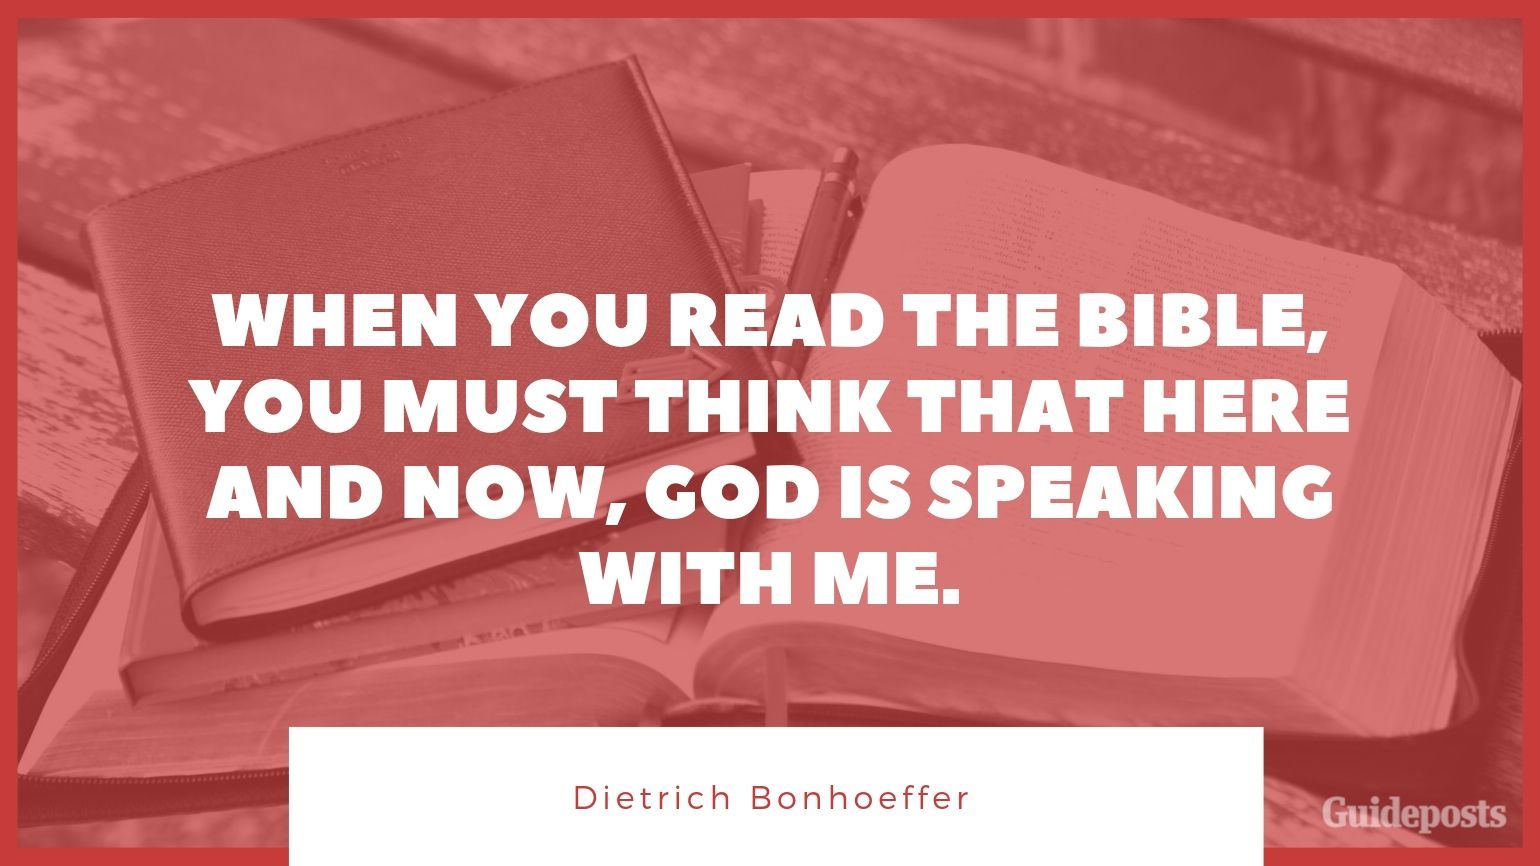 7 Inspiring Quotes from Dietrich Bonhoeffer German Pastor When you read the Bible, you must think that here and now, God is speaking with me." Inspiration Inspirational Stories of Faith